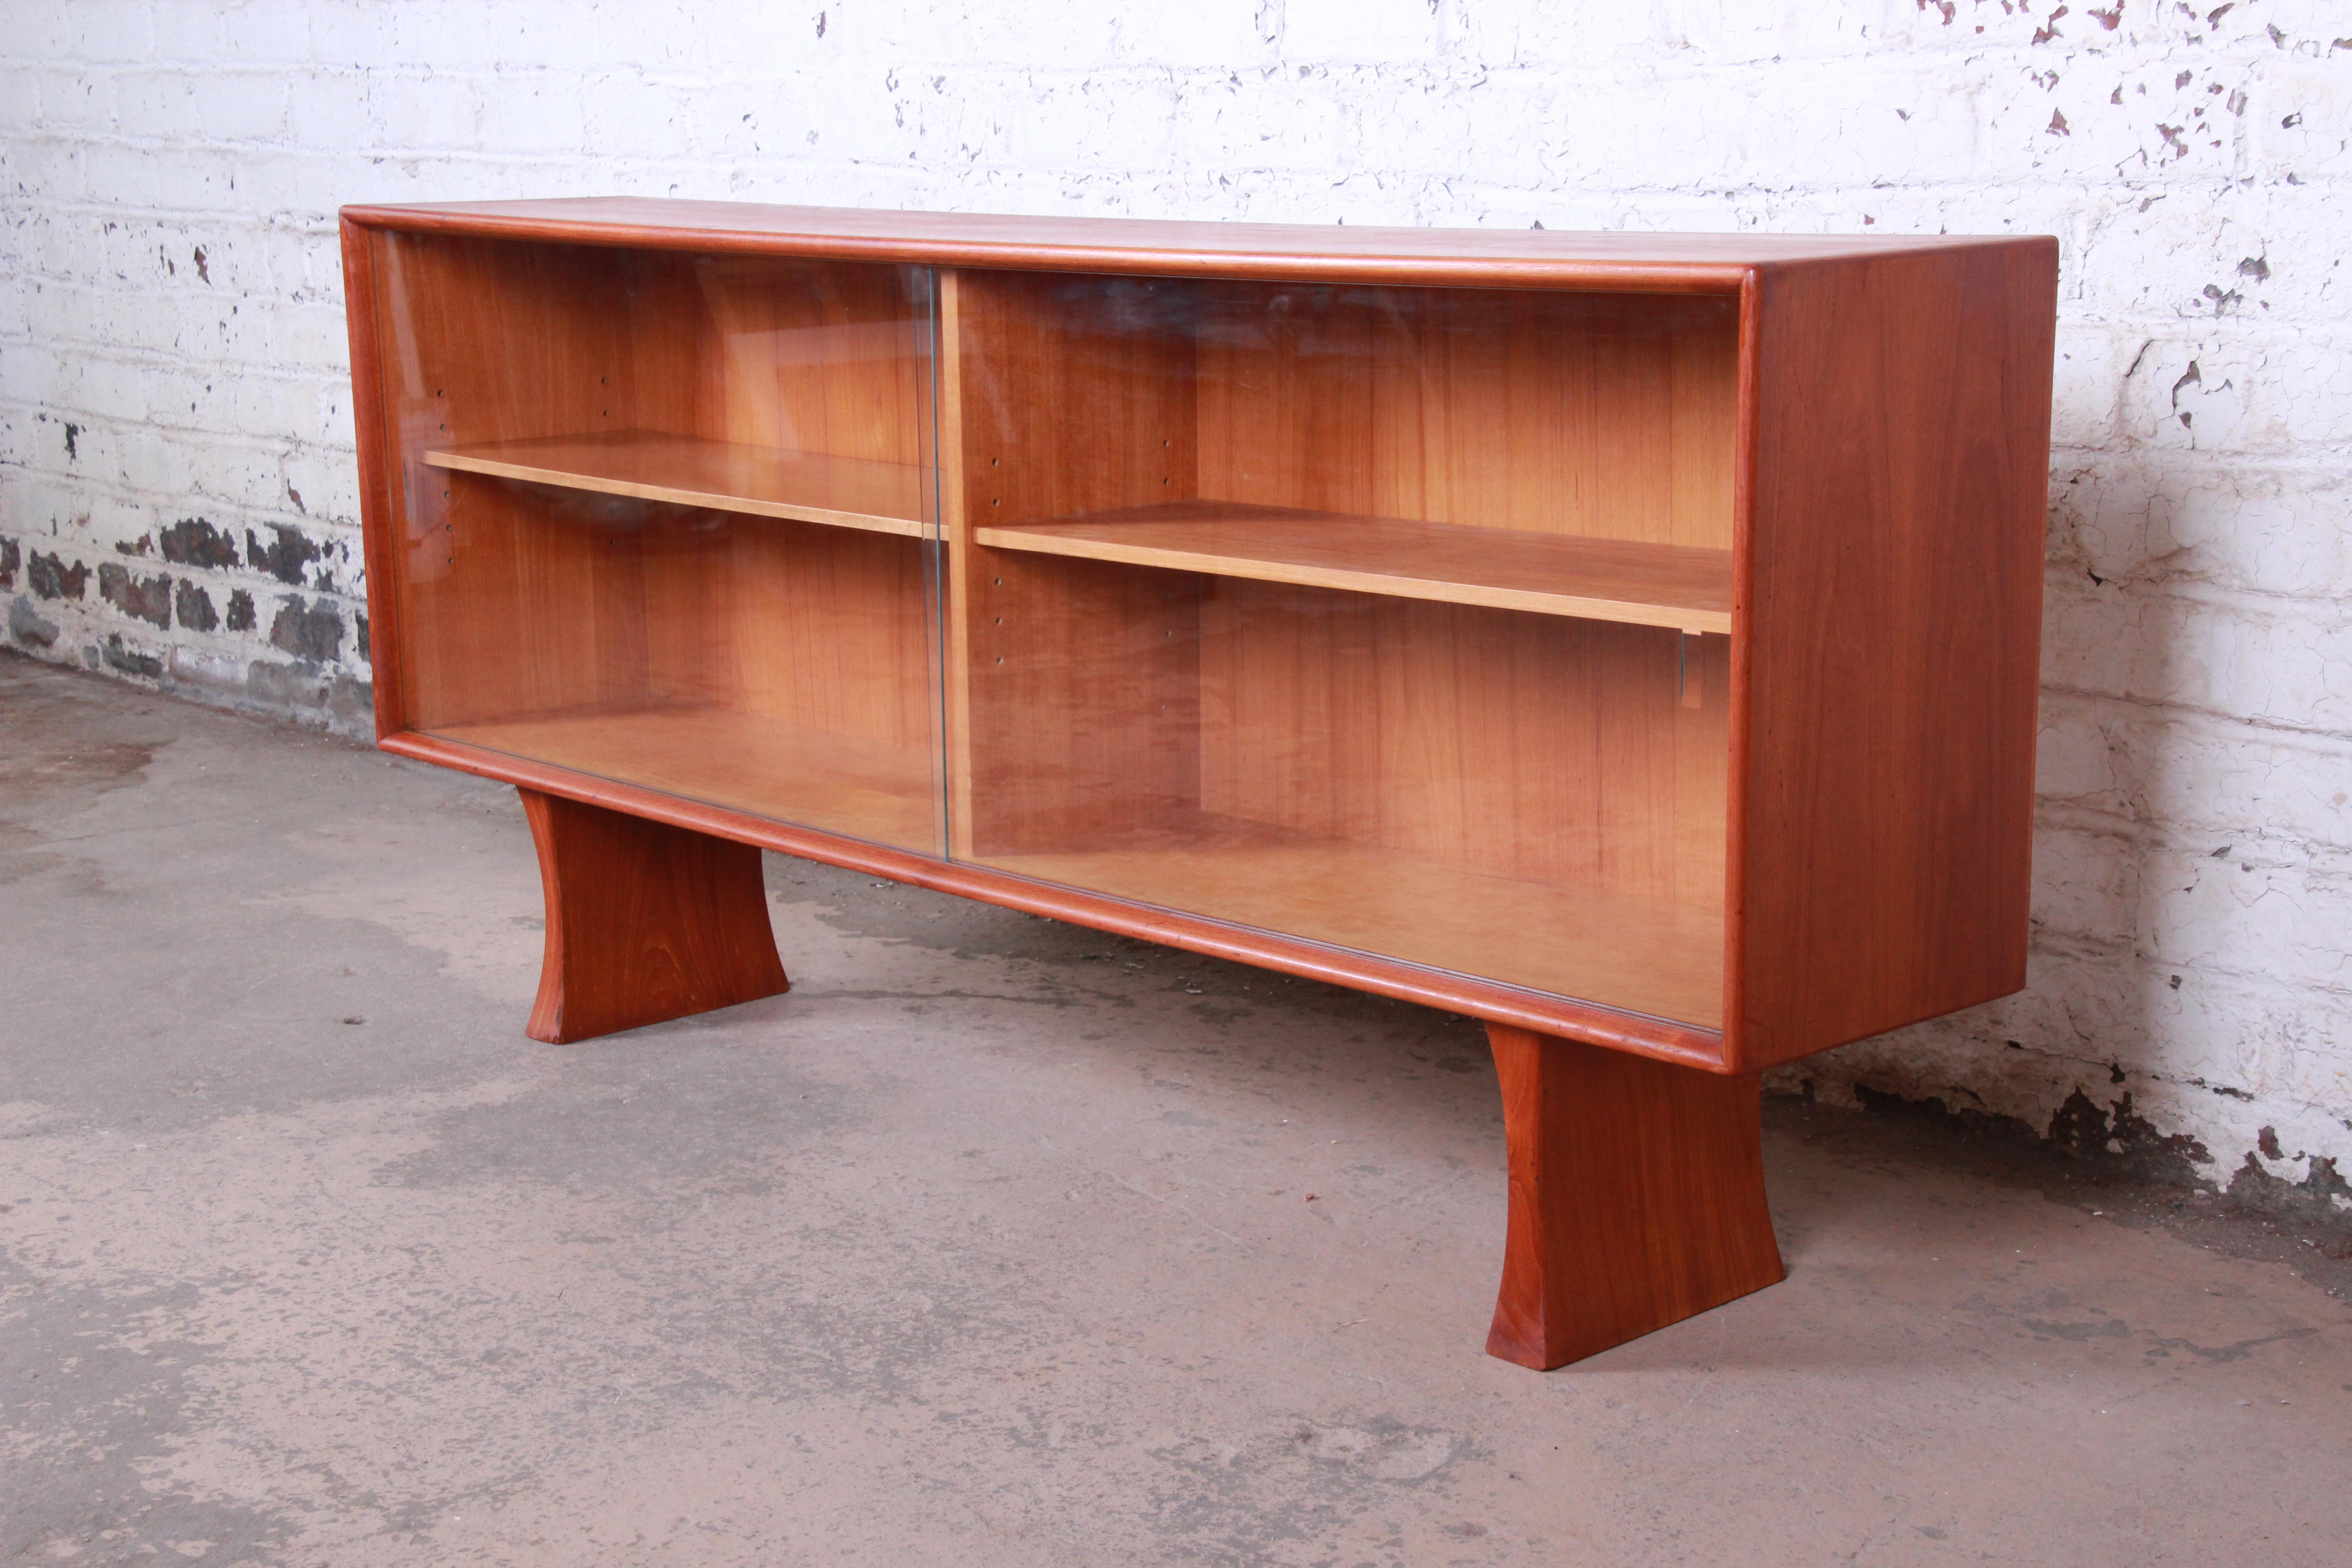 A stunning midcentury Danish modern teak glass front bookcase or credenza. The credenza features beautiful teak wood grain and sleek Danish design. It has a floating design, with two sculpted solid teak legs and a teak case that is finished on all